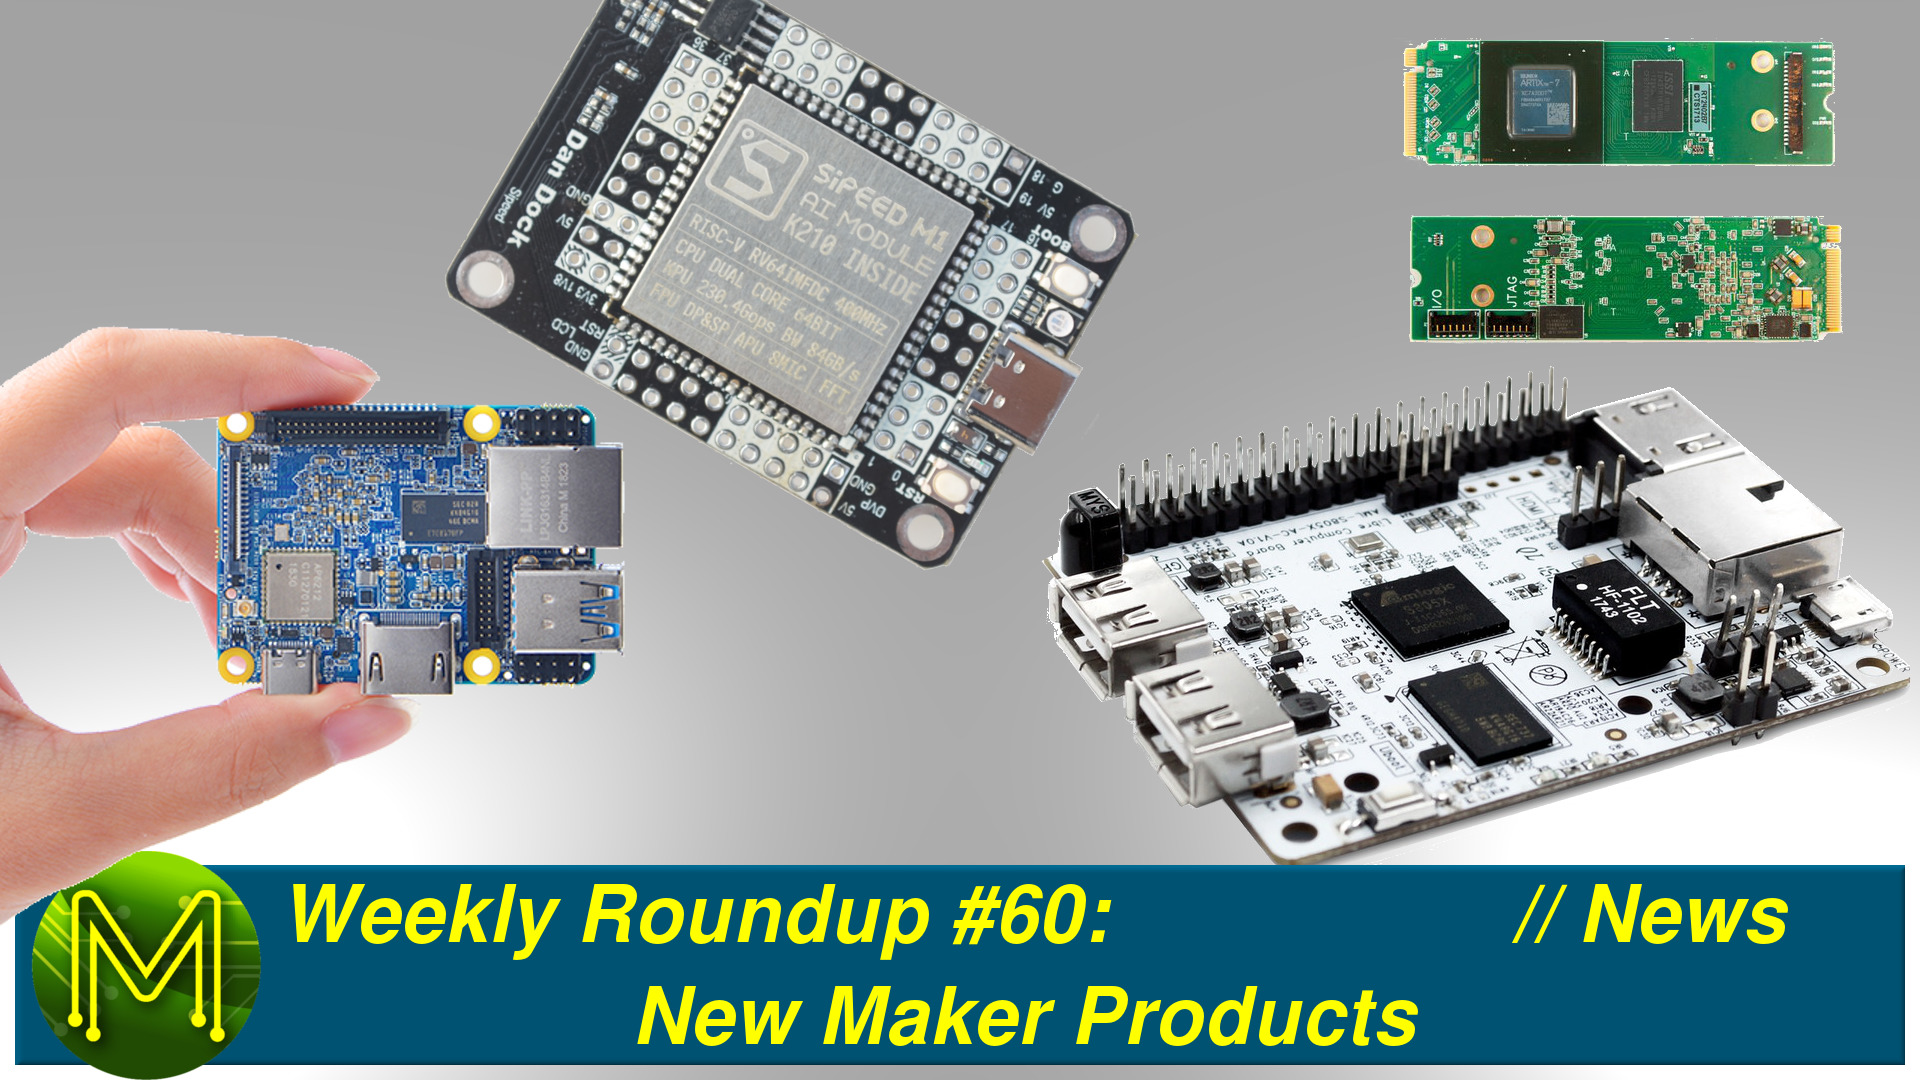 Weekly Roundup #60: New Maker Products // News